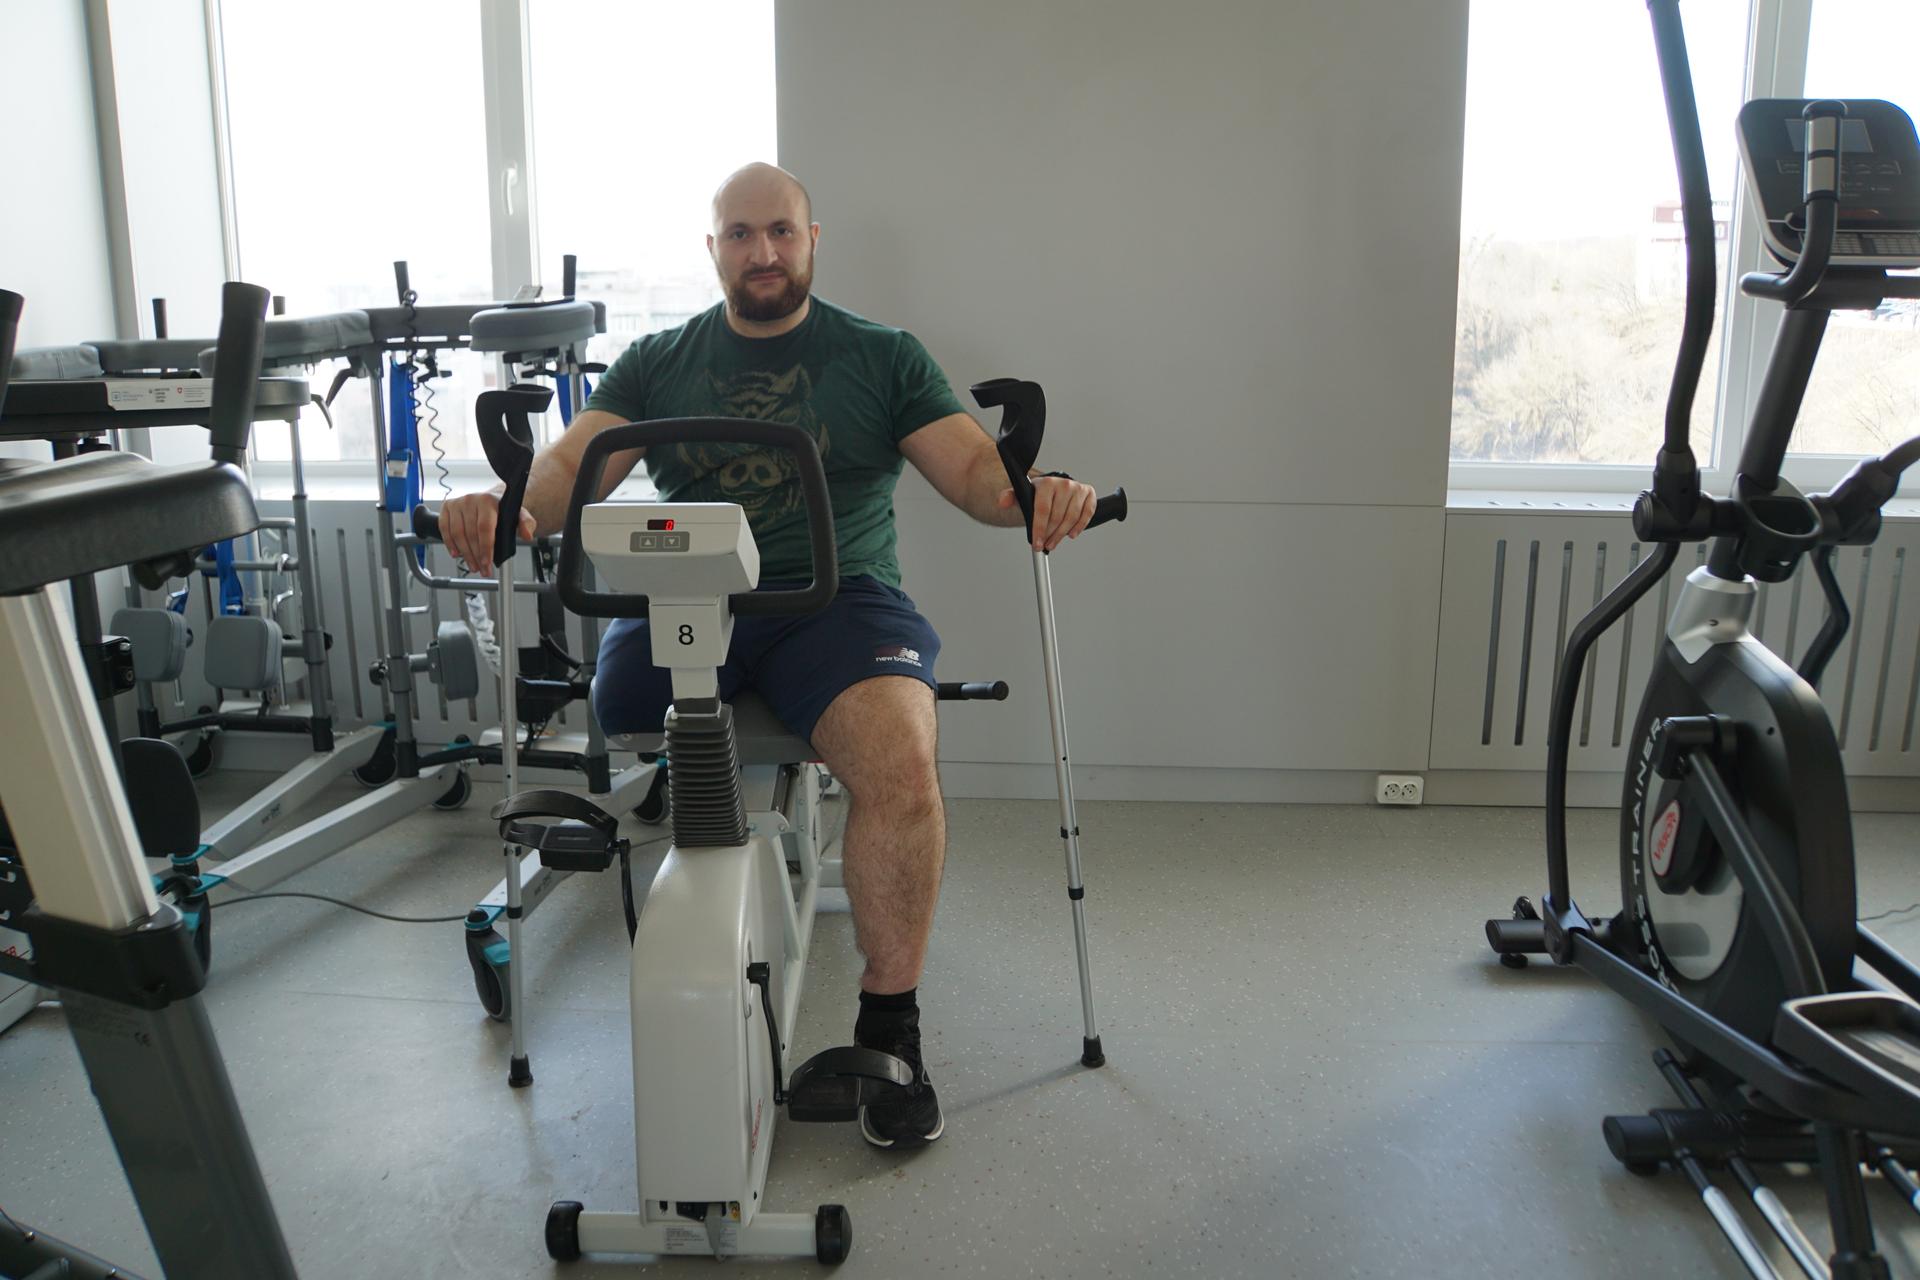 Oleksandr lost his right leg during combat. He is now going through rehab at the Unbroken National Rehabilitation Center in Lviv Ukraine.